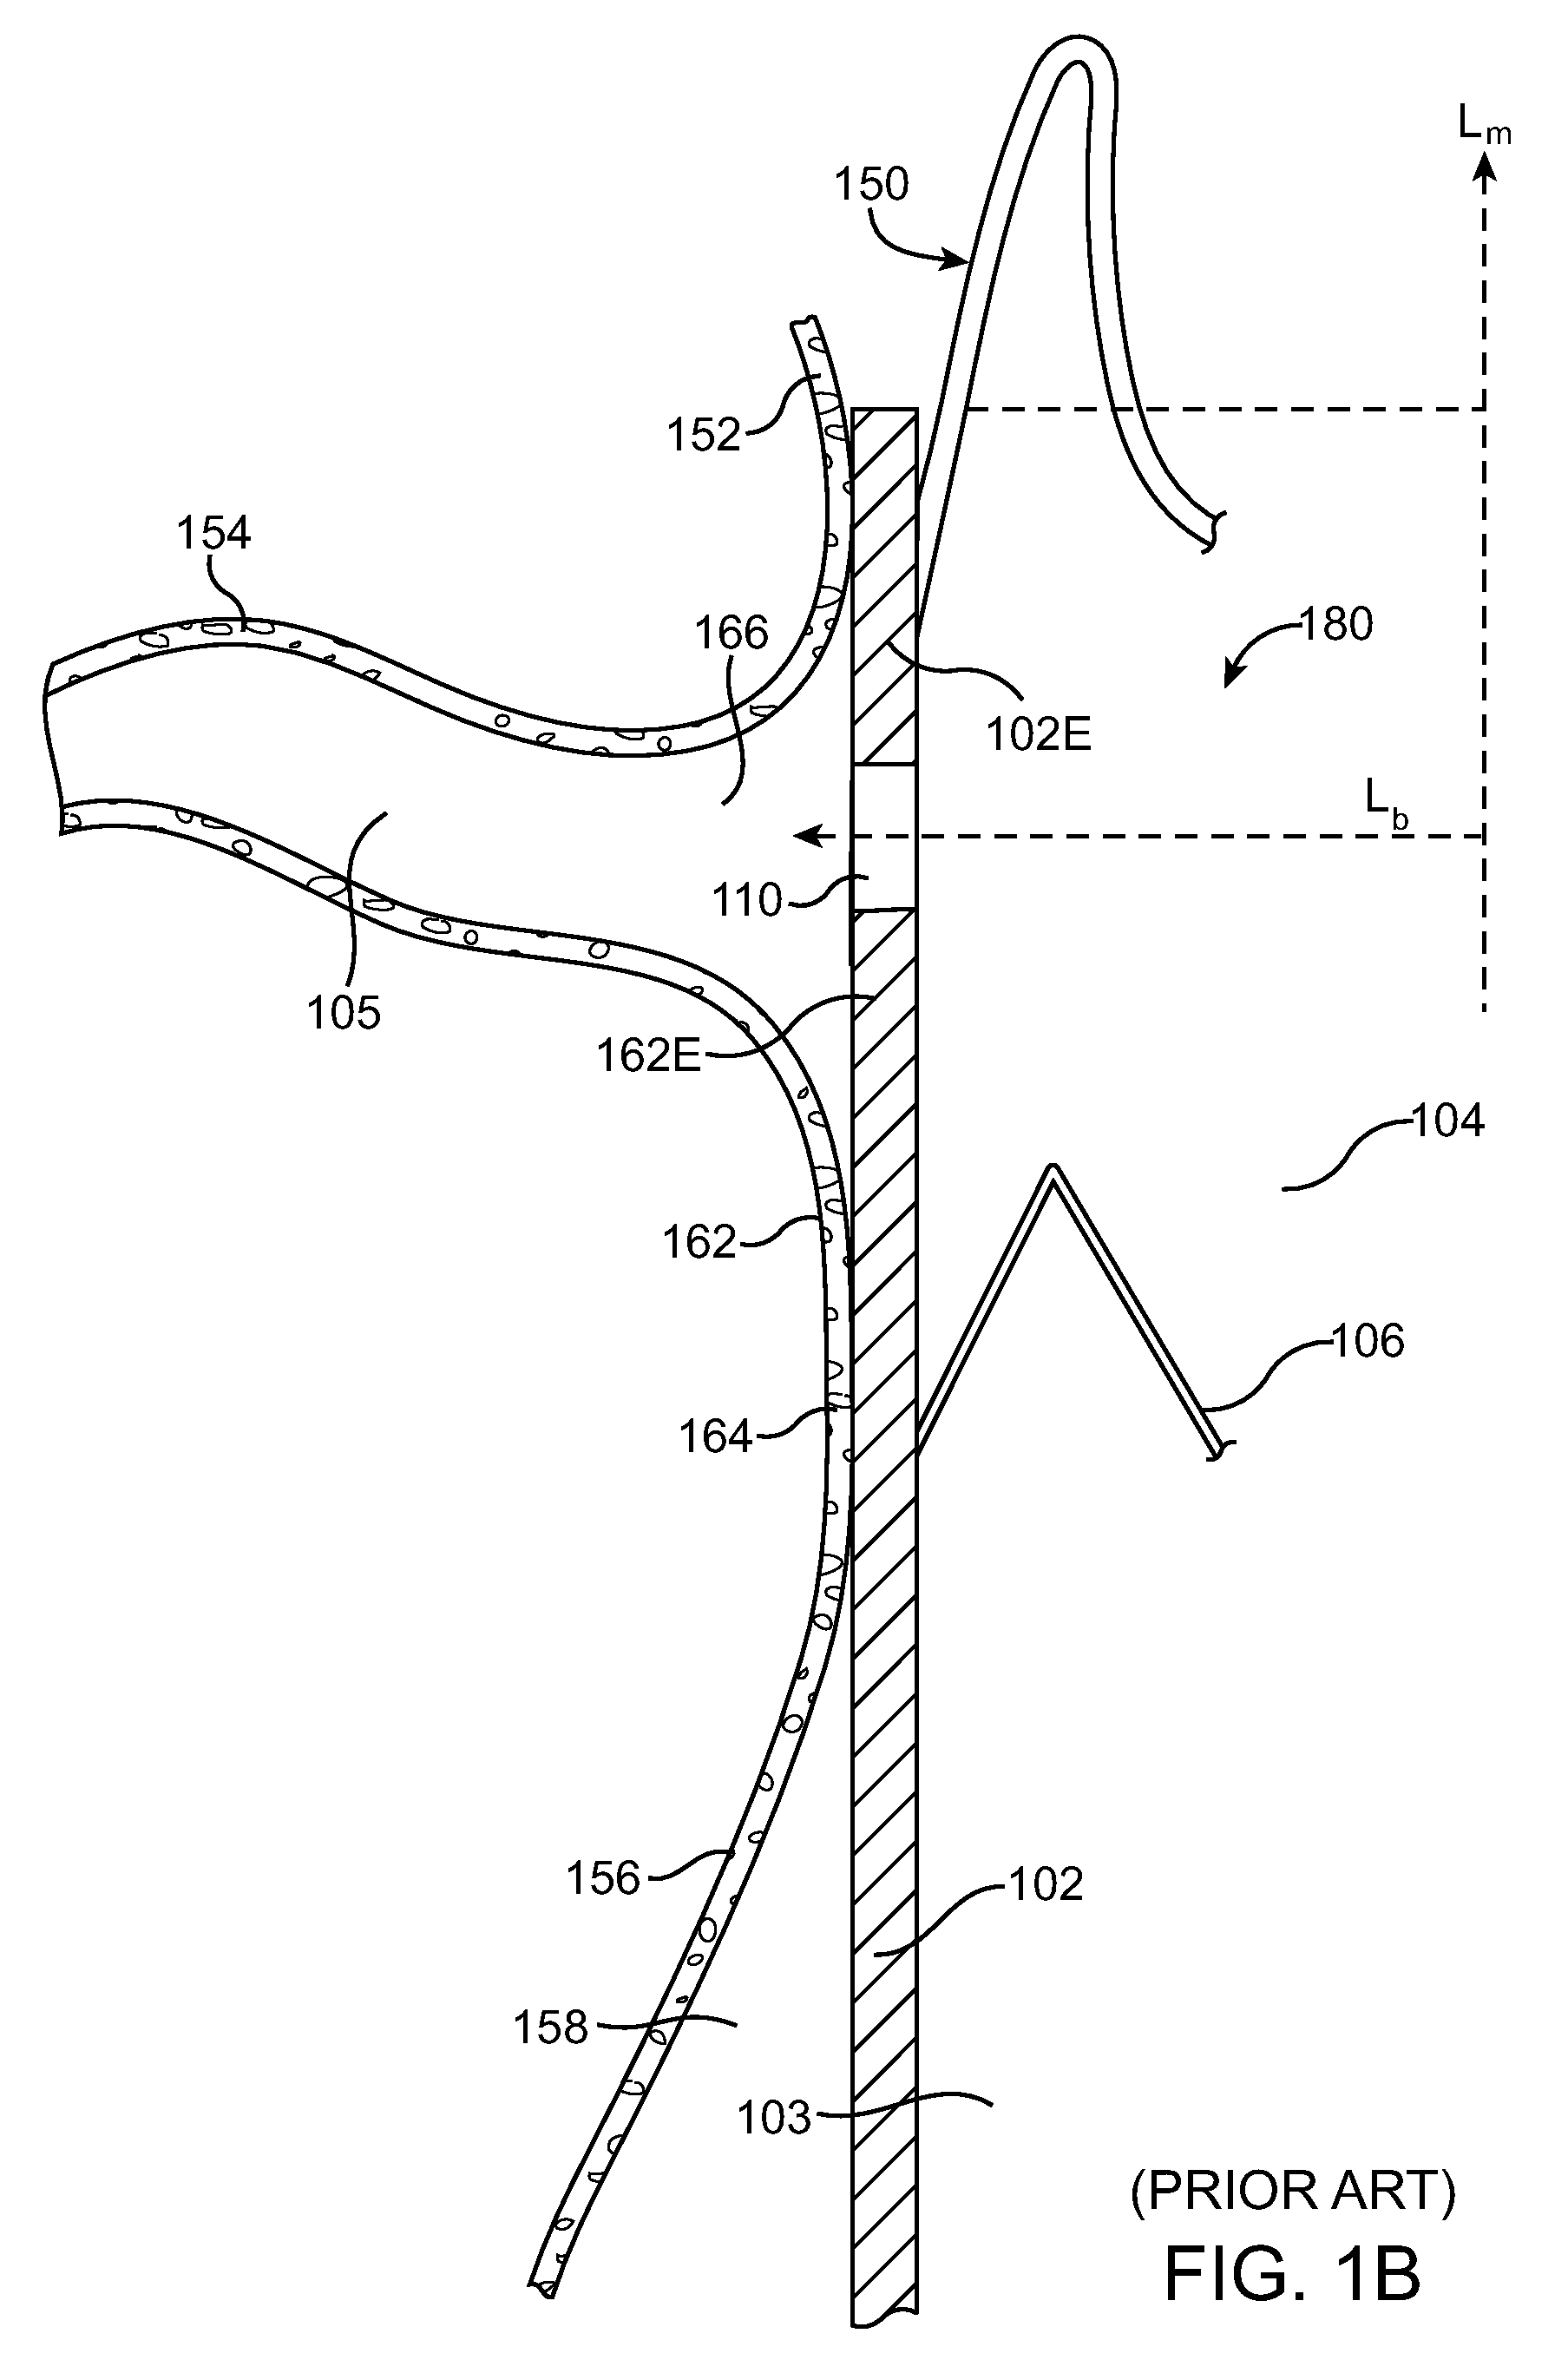 Stent graft having a flexible, articulable, and axially compressible branch graft